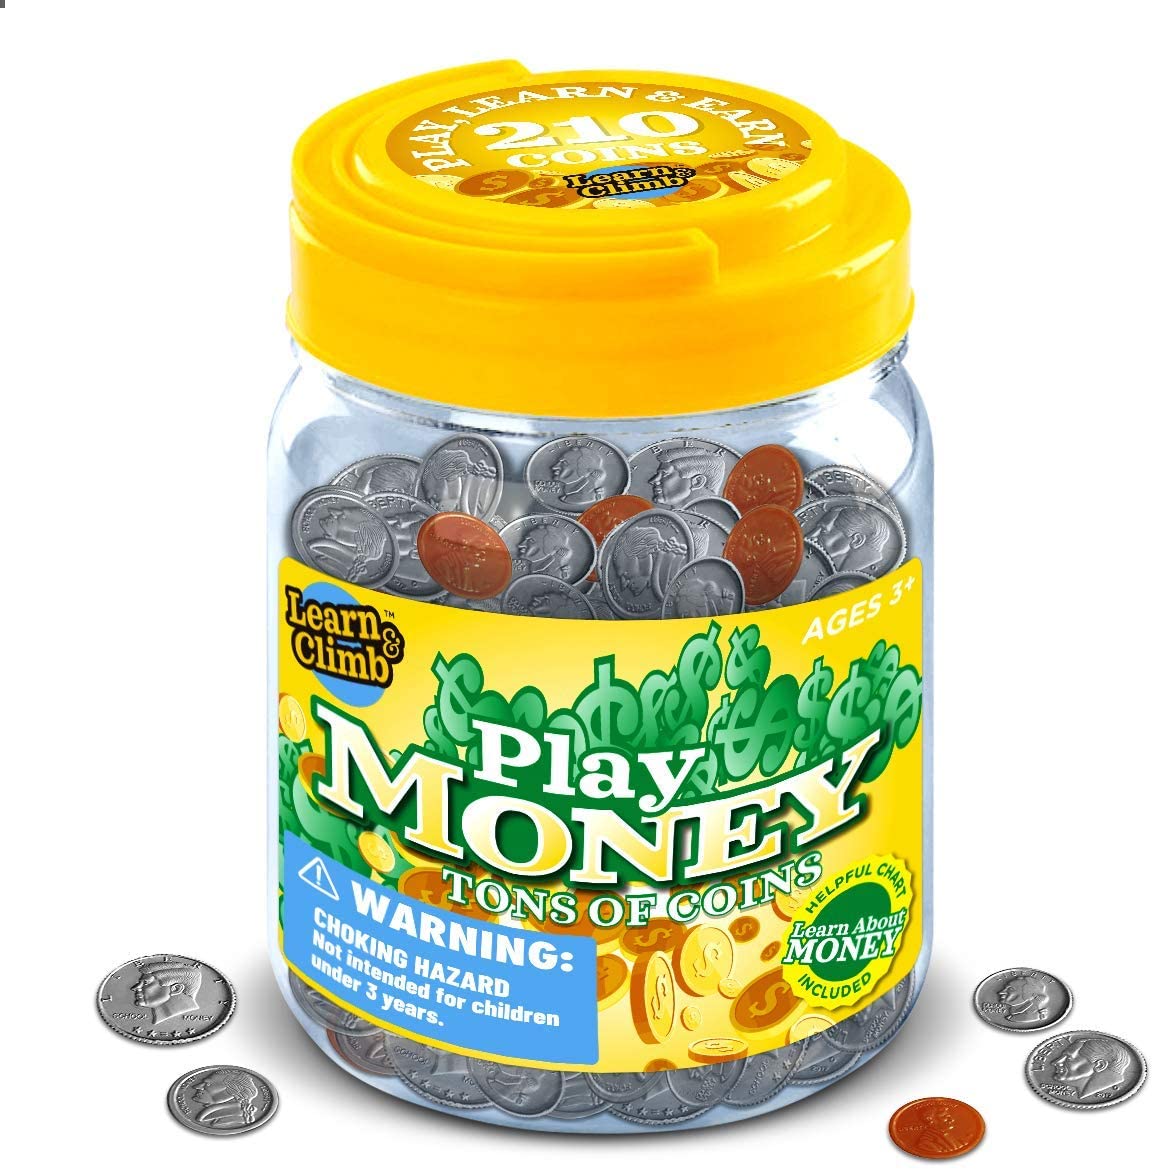 Learn & Climb Play Money Coins for Kids – 10 Half Dollars, 50 Quarters, 50 Dimes, 50 Nickels, 50 Pennies